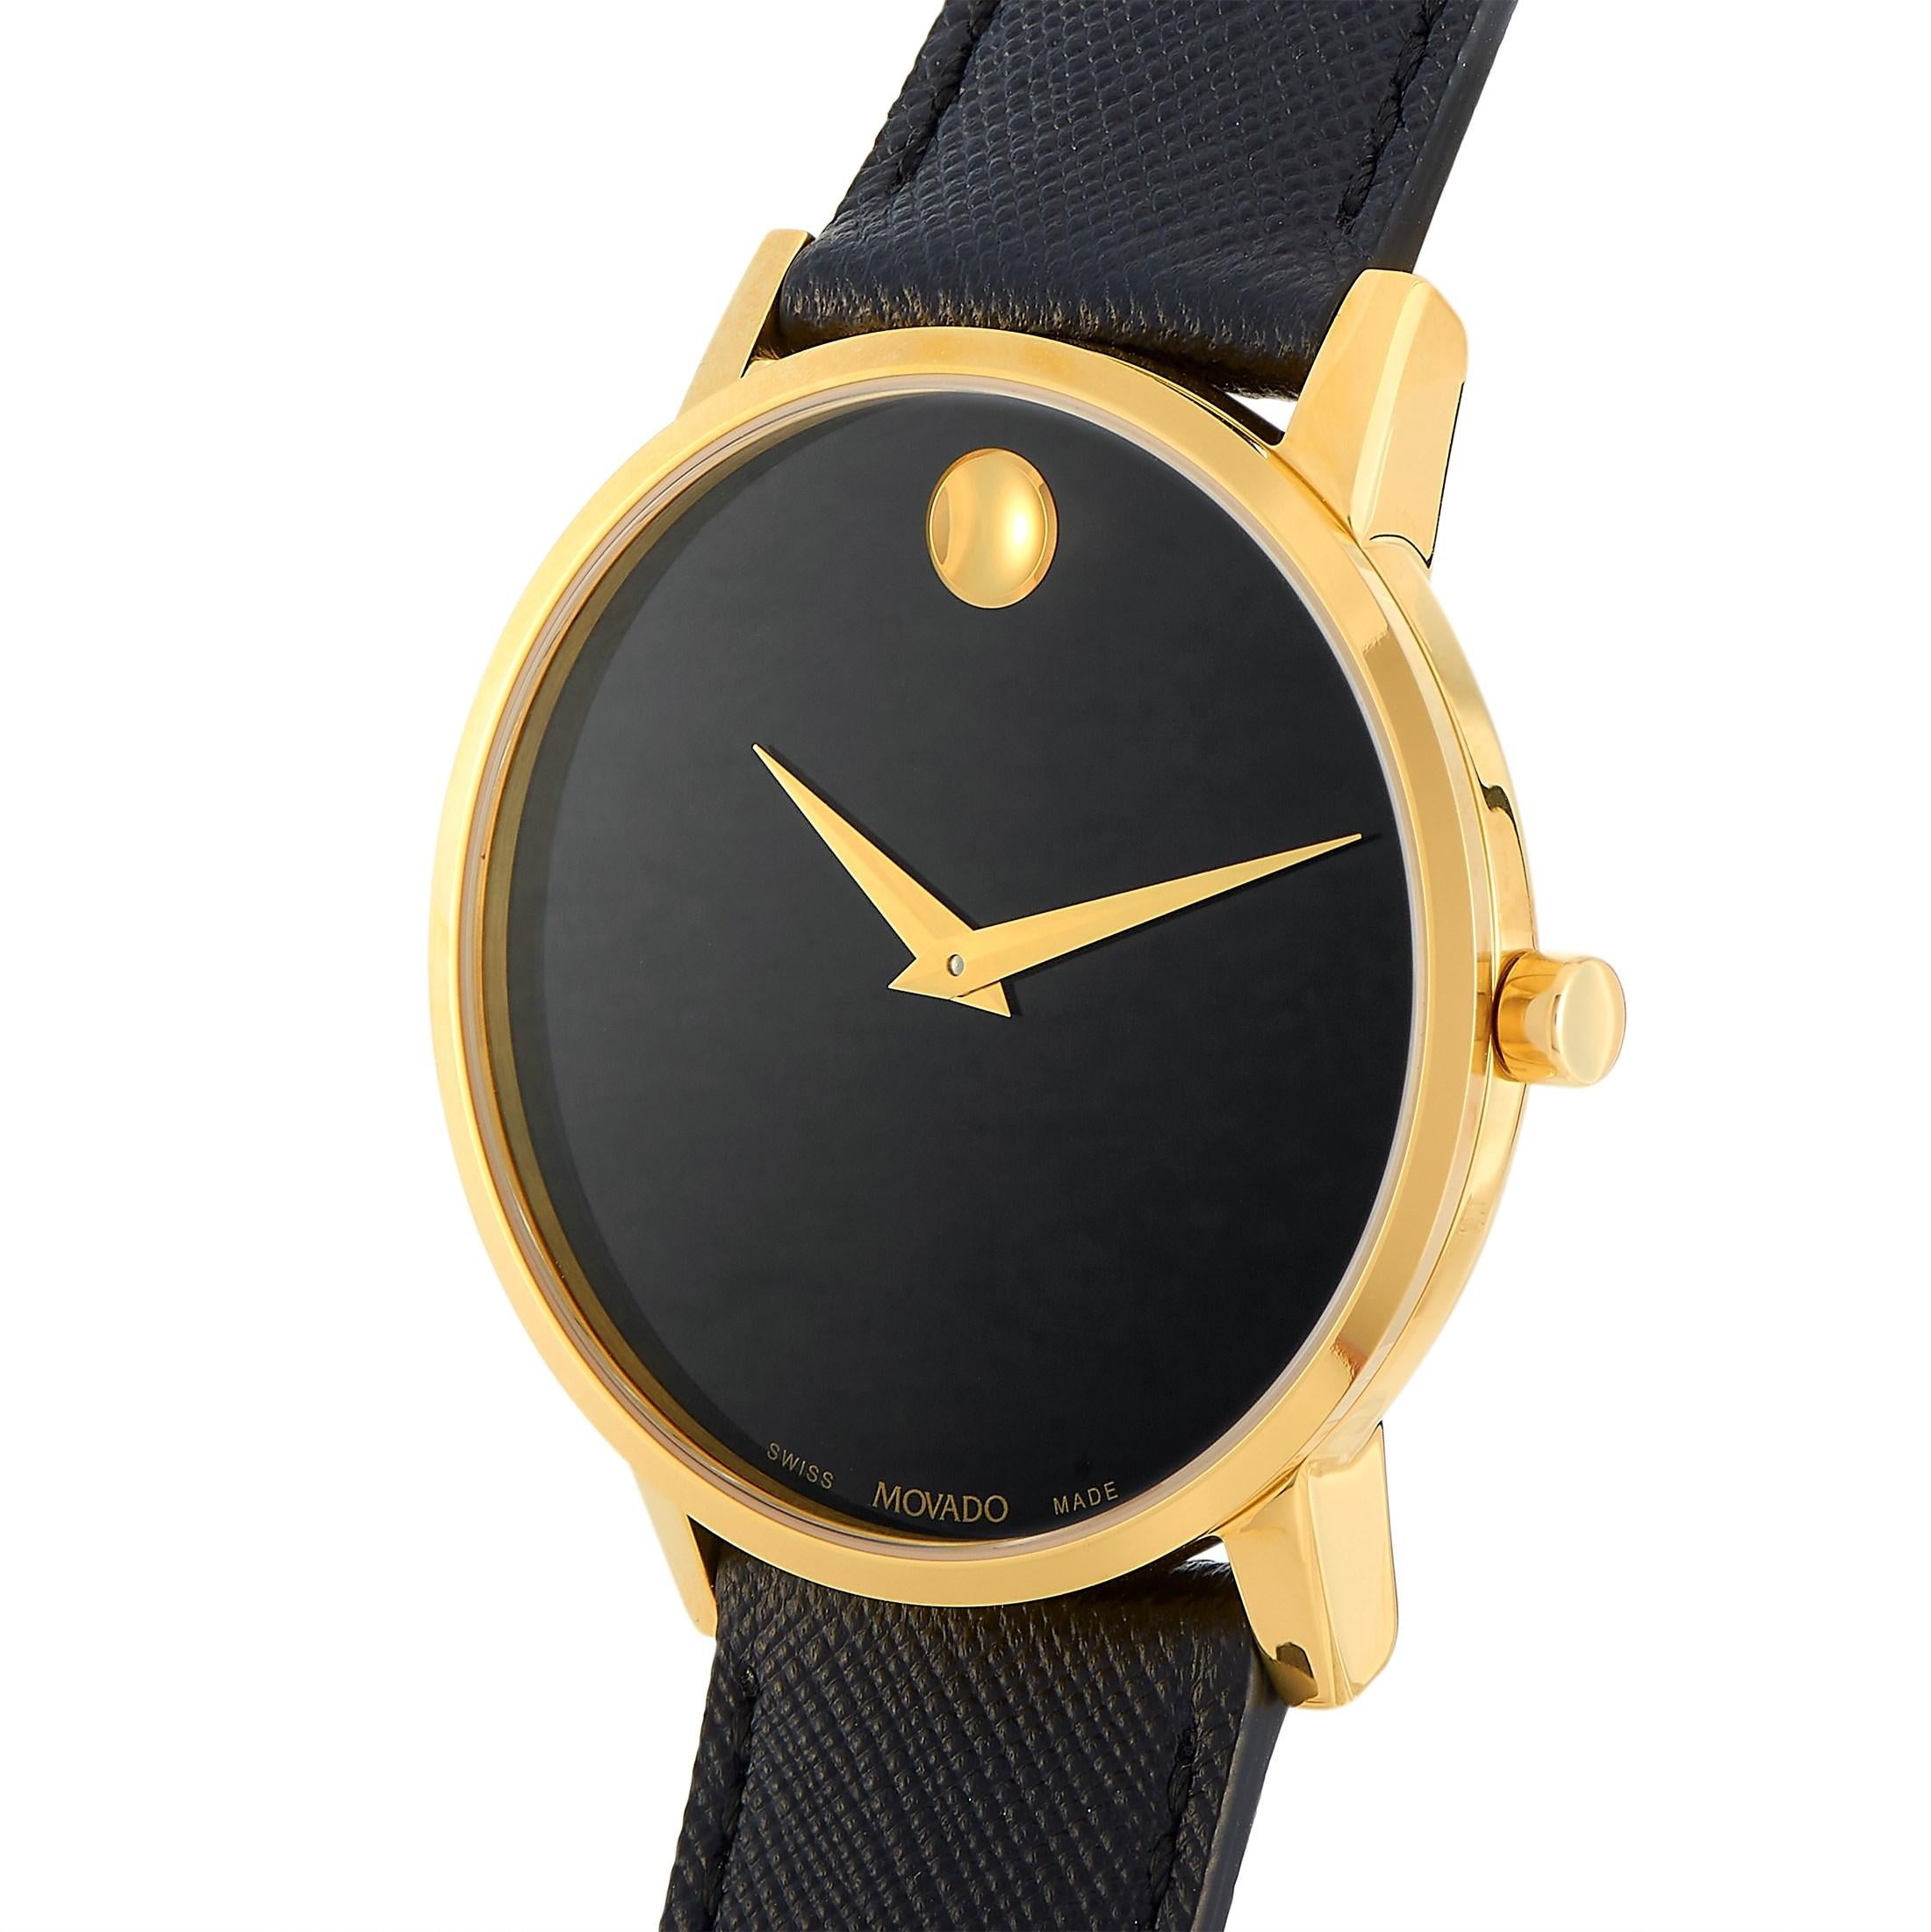 The Movado Museum Classic watch, reference number MV0607195, comes with a yellow PVD-plated stainless steel case that measures 40 mm in diameter. The case is presented on a black saffiano leather strap, secured on the wrist with a tang buckle. This